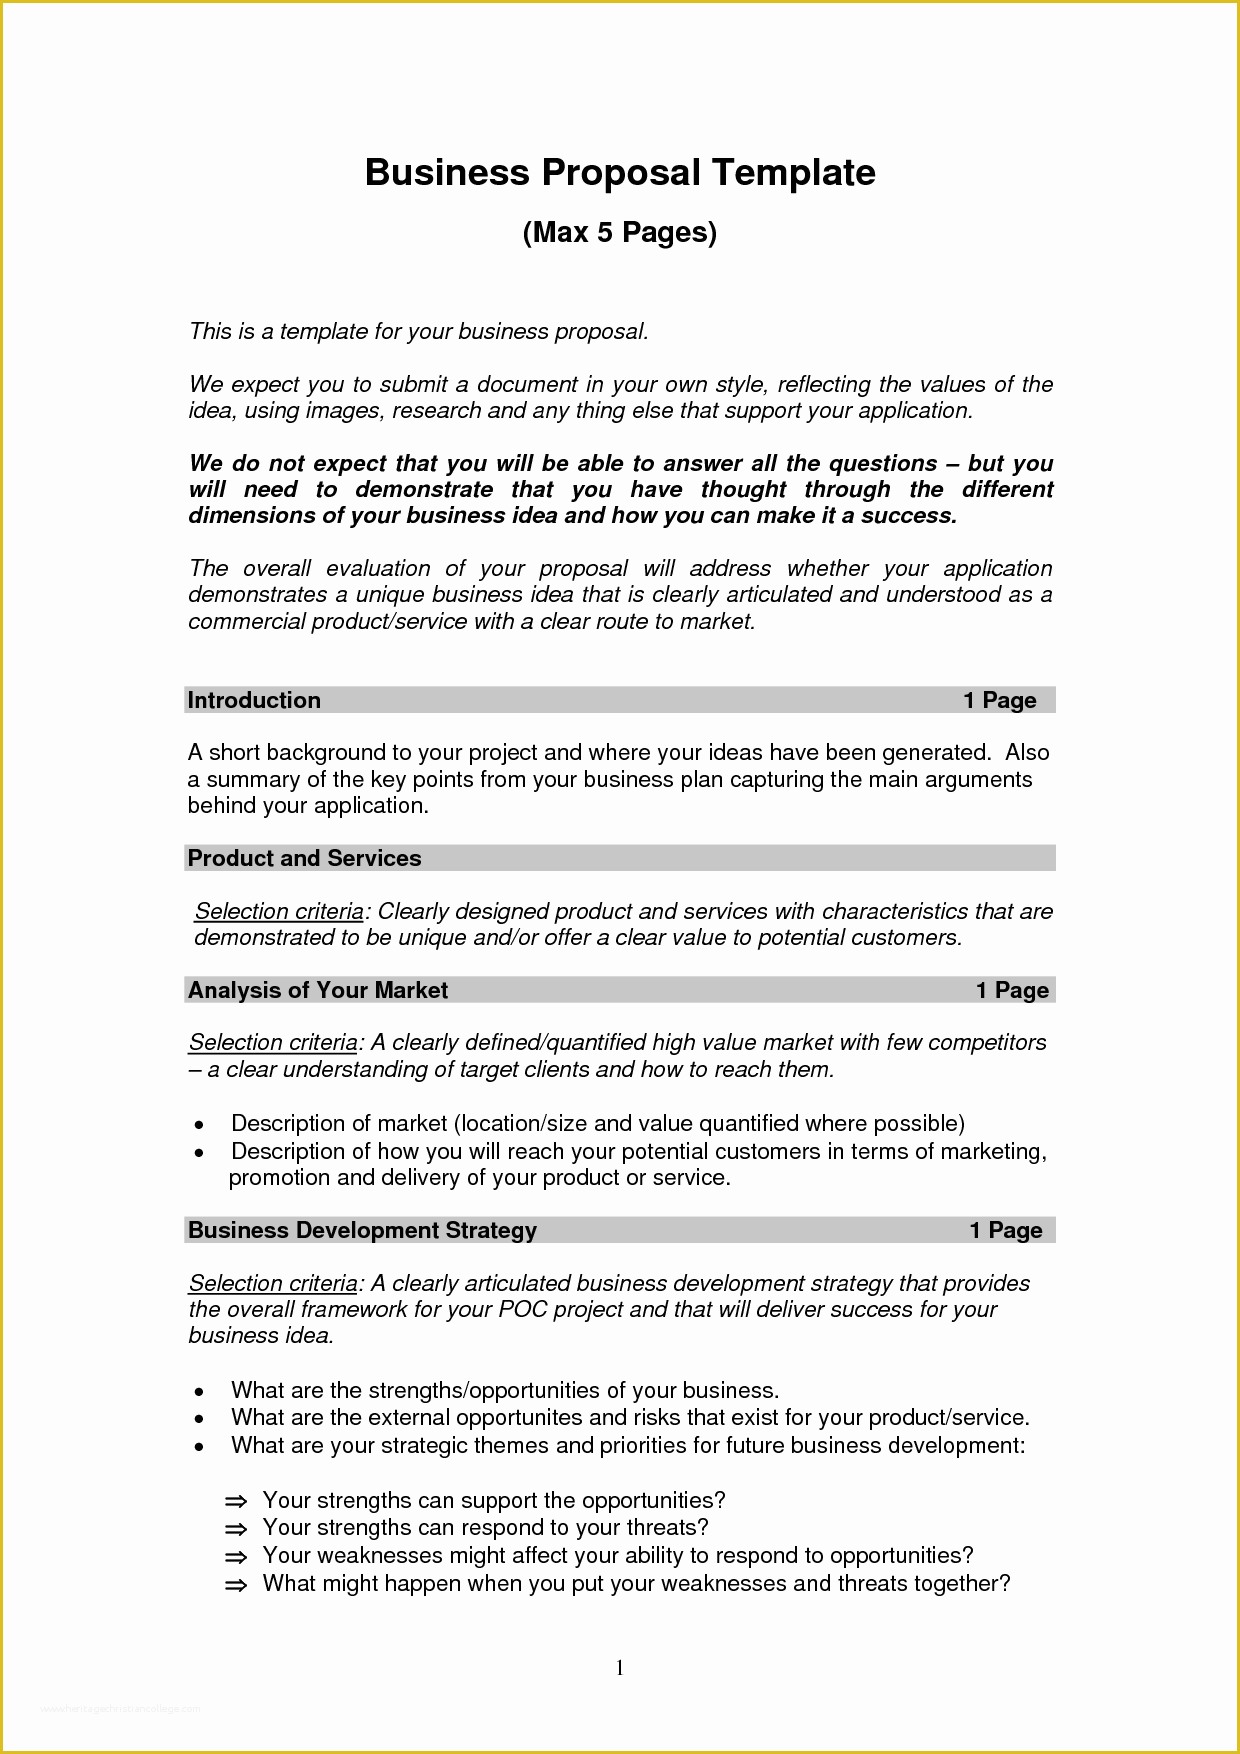 Free Business Proposal Template Of Business Proposal Templates Examples